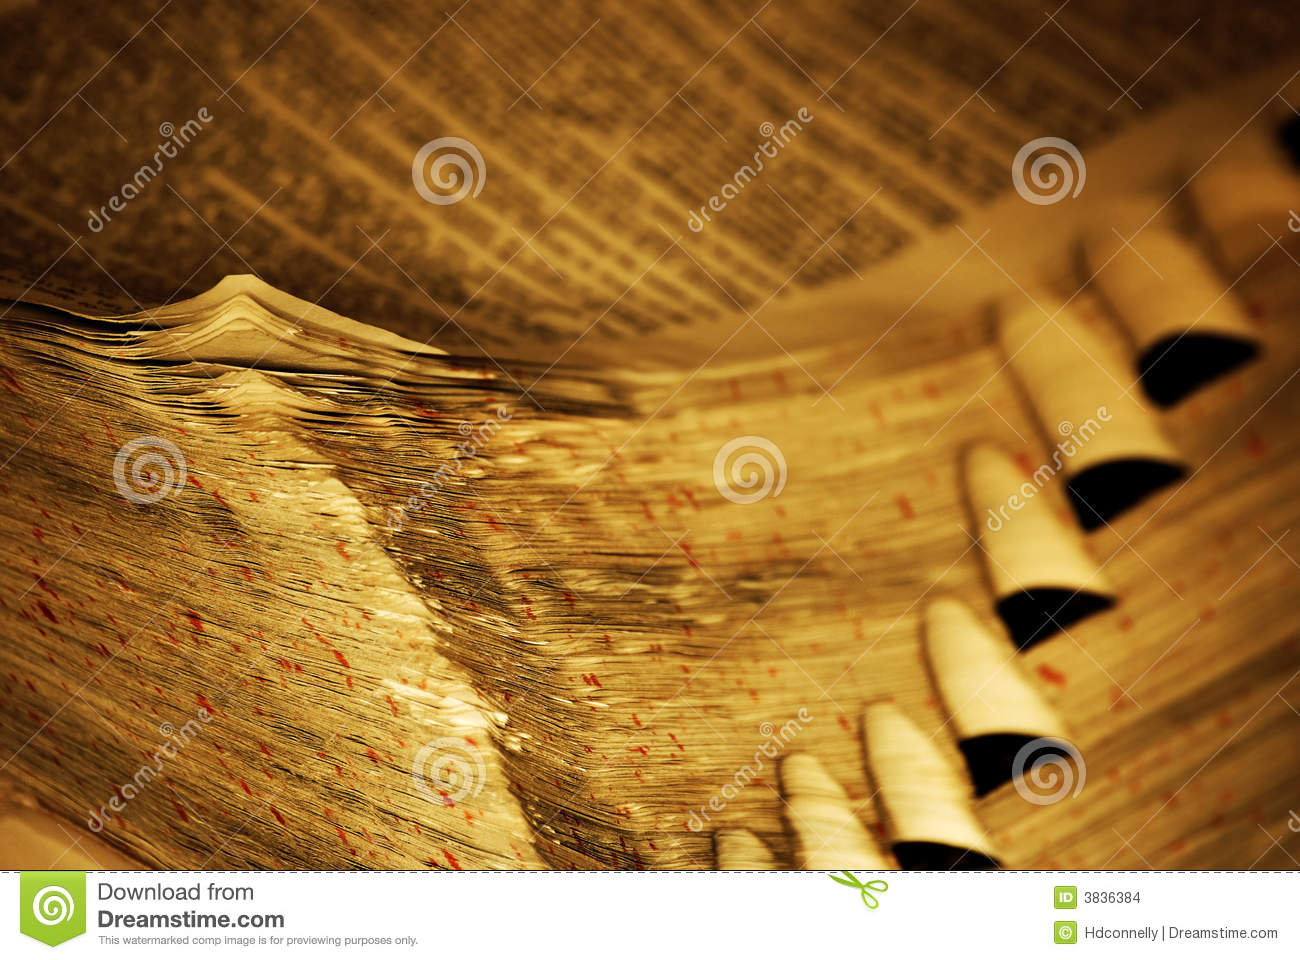 Worn Pages Of Book Stock Images   Image  3836384